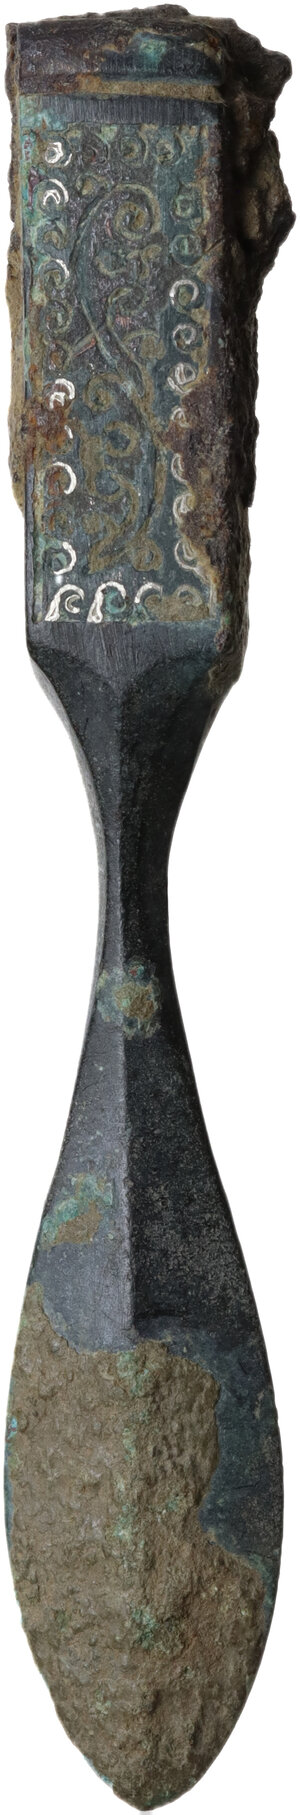 obverse: Late Roman period, Balkans. Bronze tool. Handle elaborately decorated with floral patterns, some silvering in the lines of the pattern.  78 mm